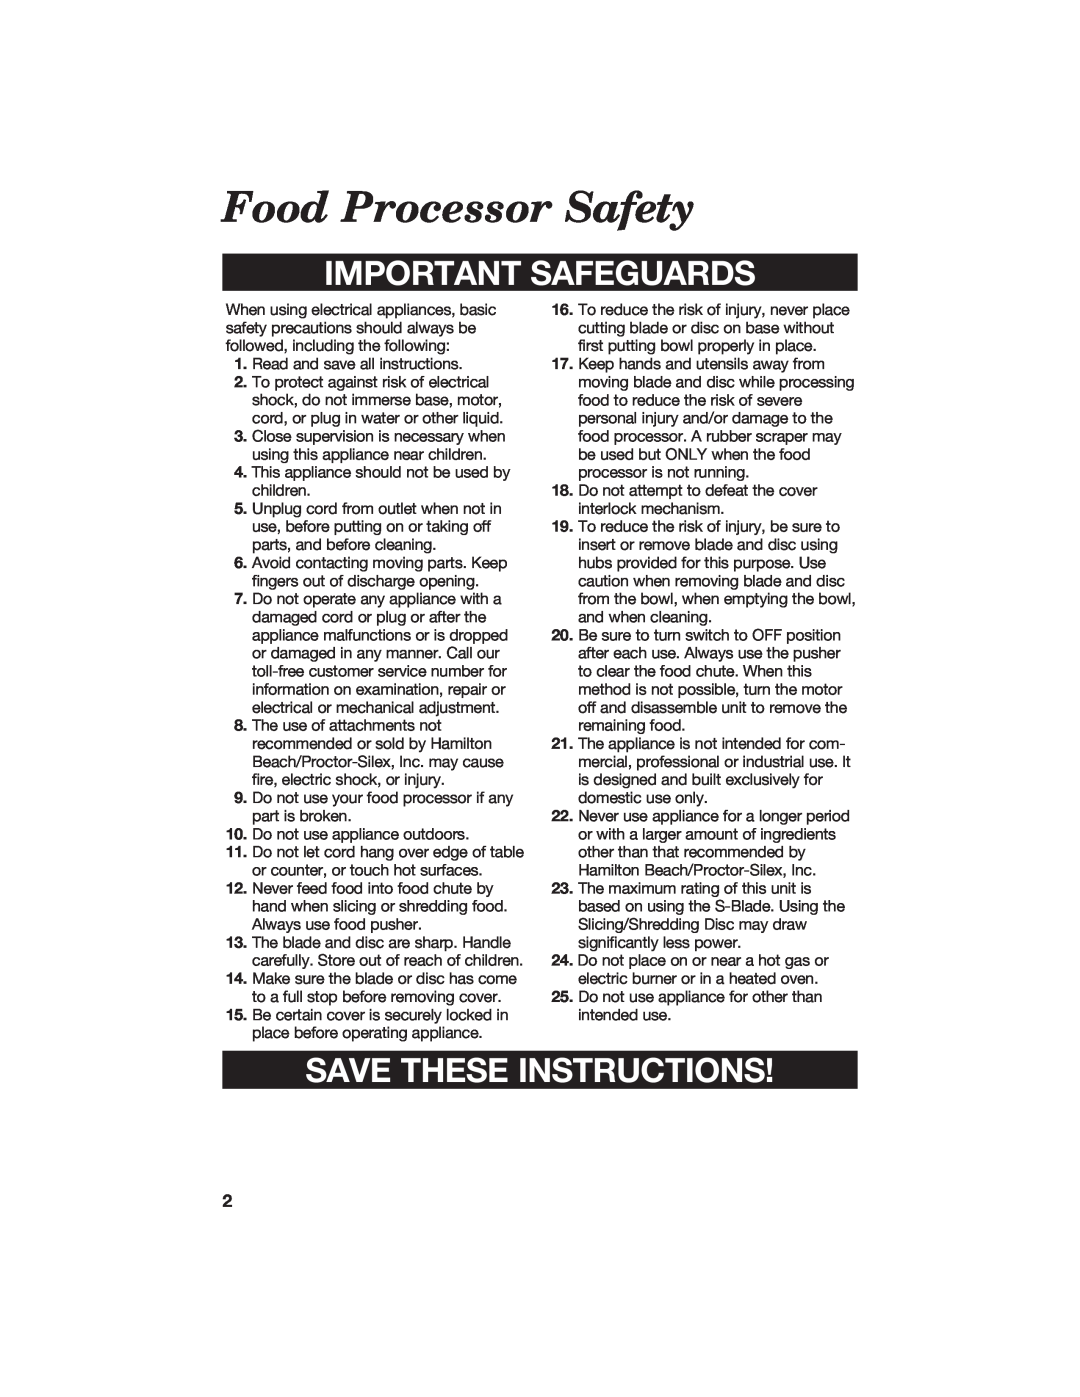 Hamilton Beach 840067300 manual Food Processor Safety, Important Safeguards, Save These Instructions 